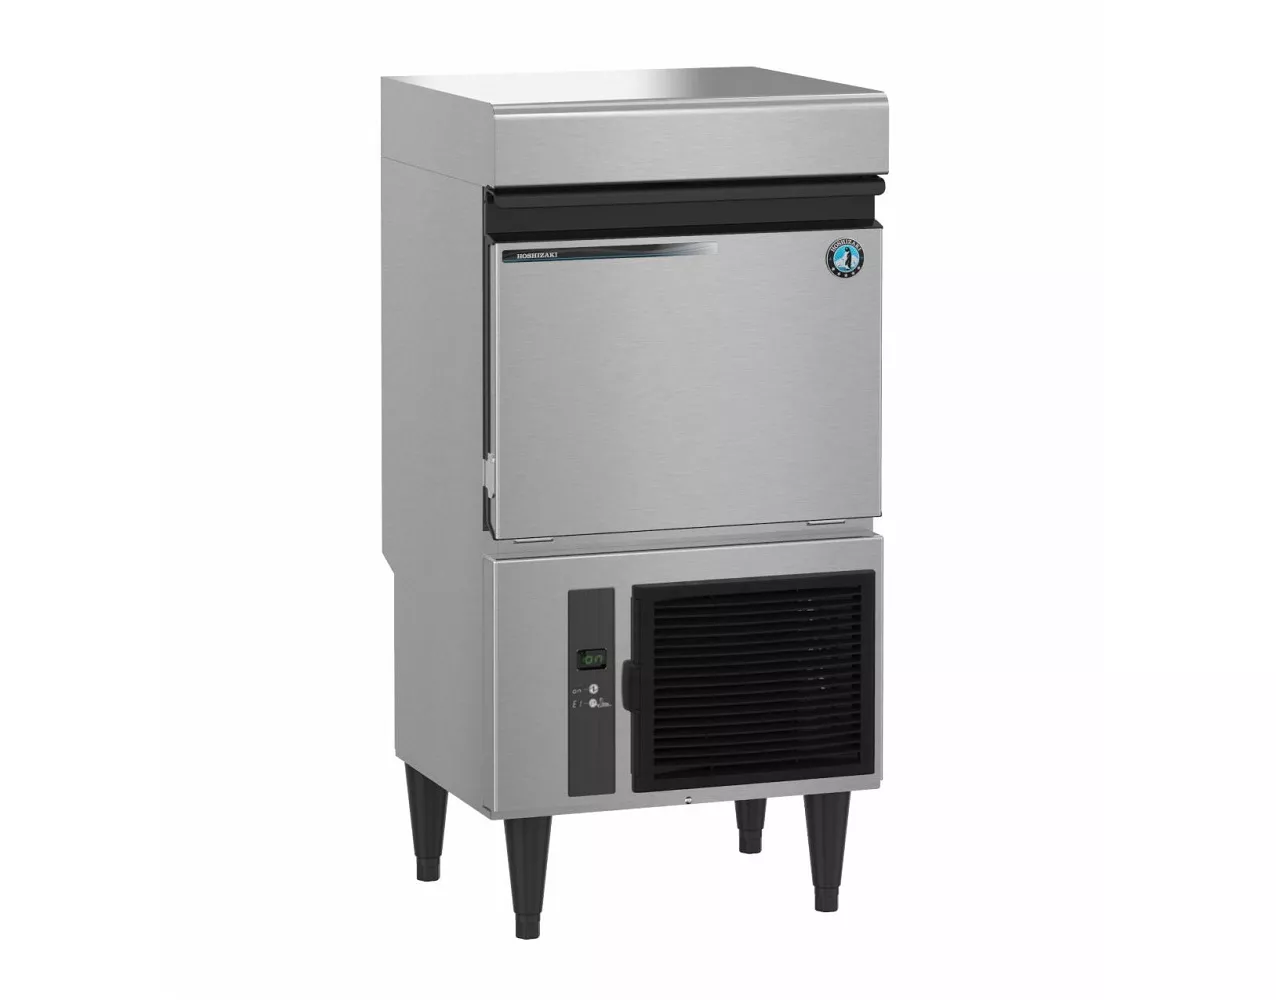 Hoshizaki America, Inc. Introduces the First 2by2 Square Cube Ice Machine